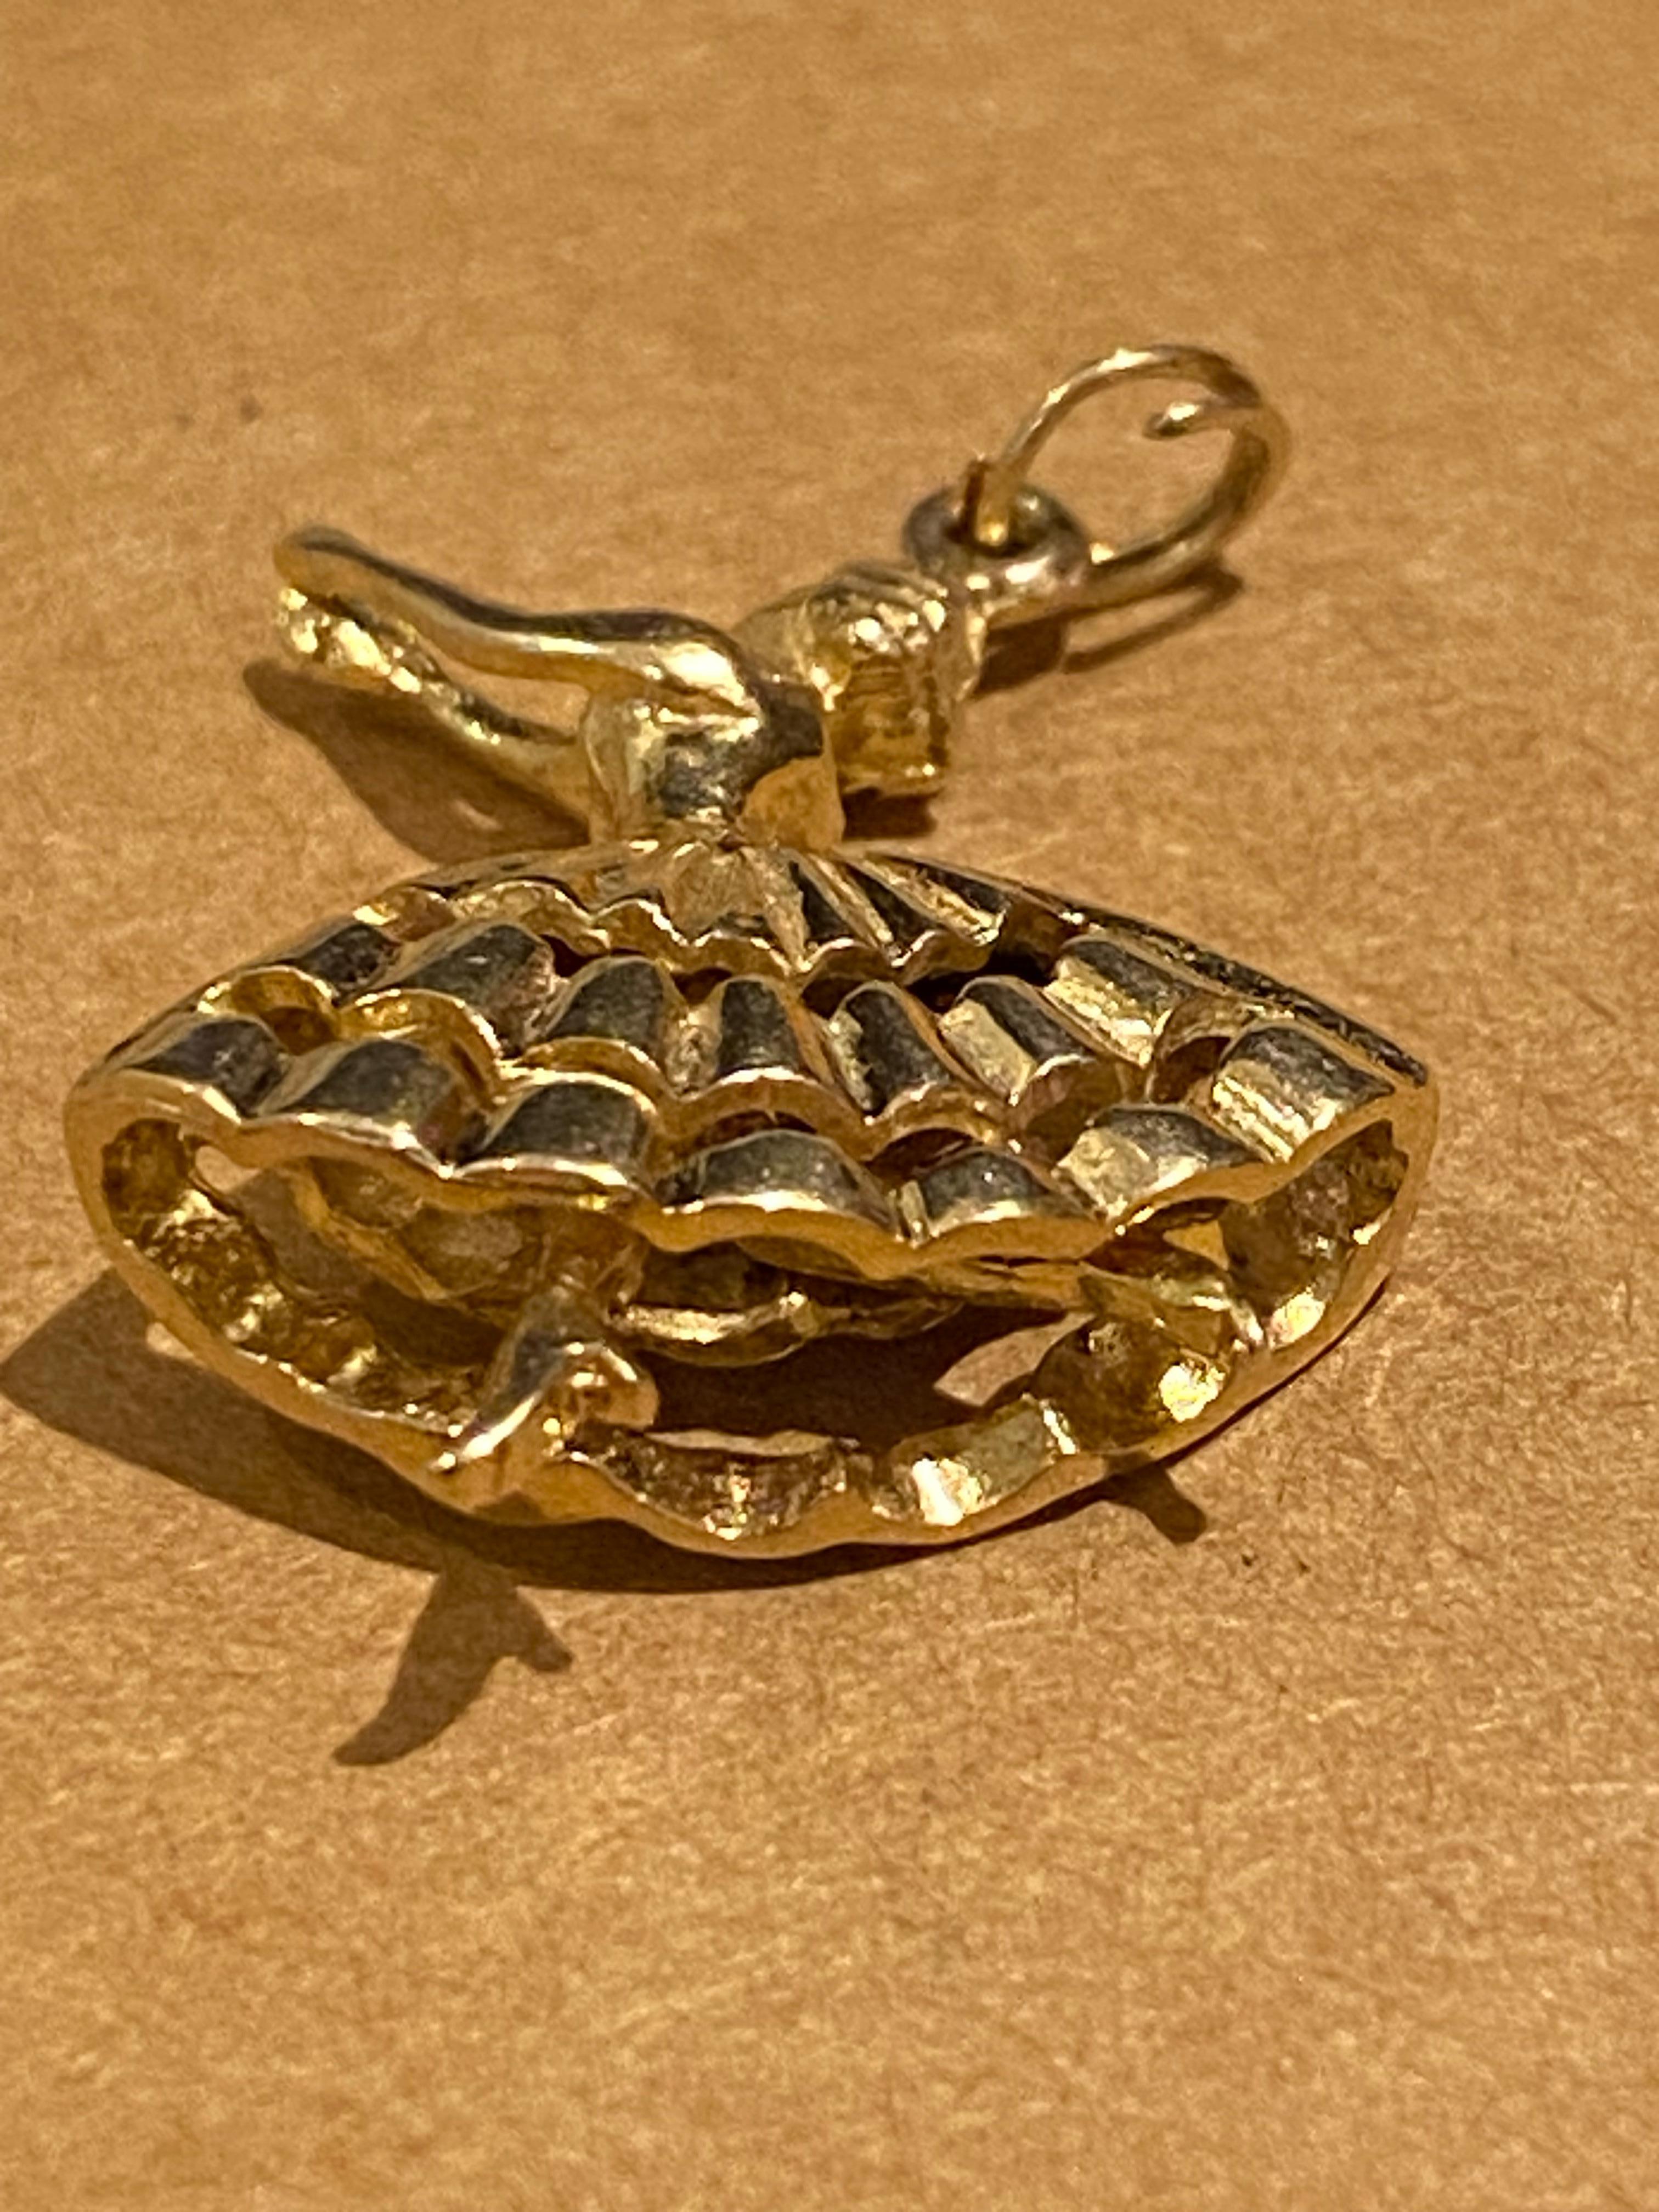 Superb 9K Yellow Gold Dancer / Ballerina with Moving Legs Charm. England, c1961. For Sale 2